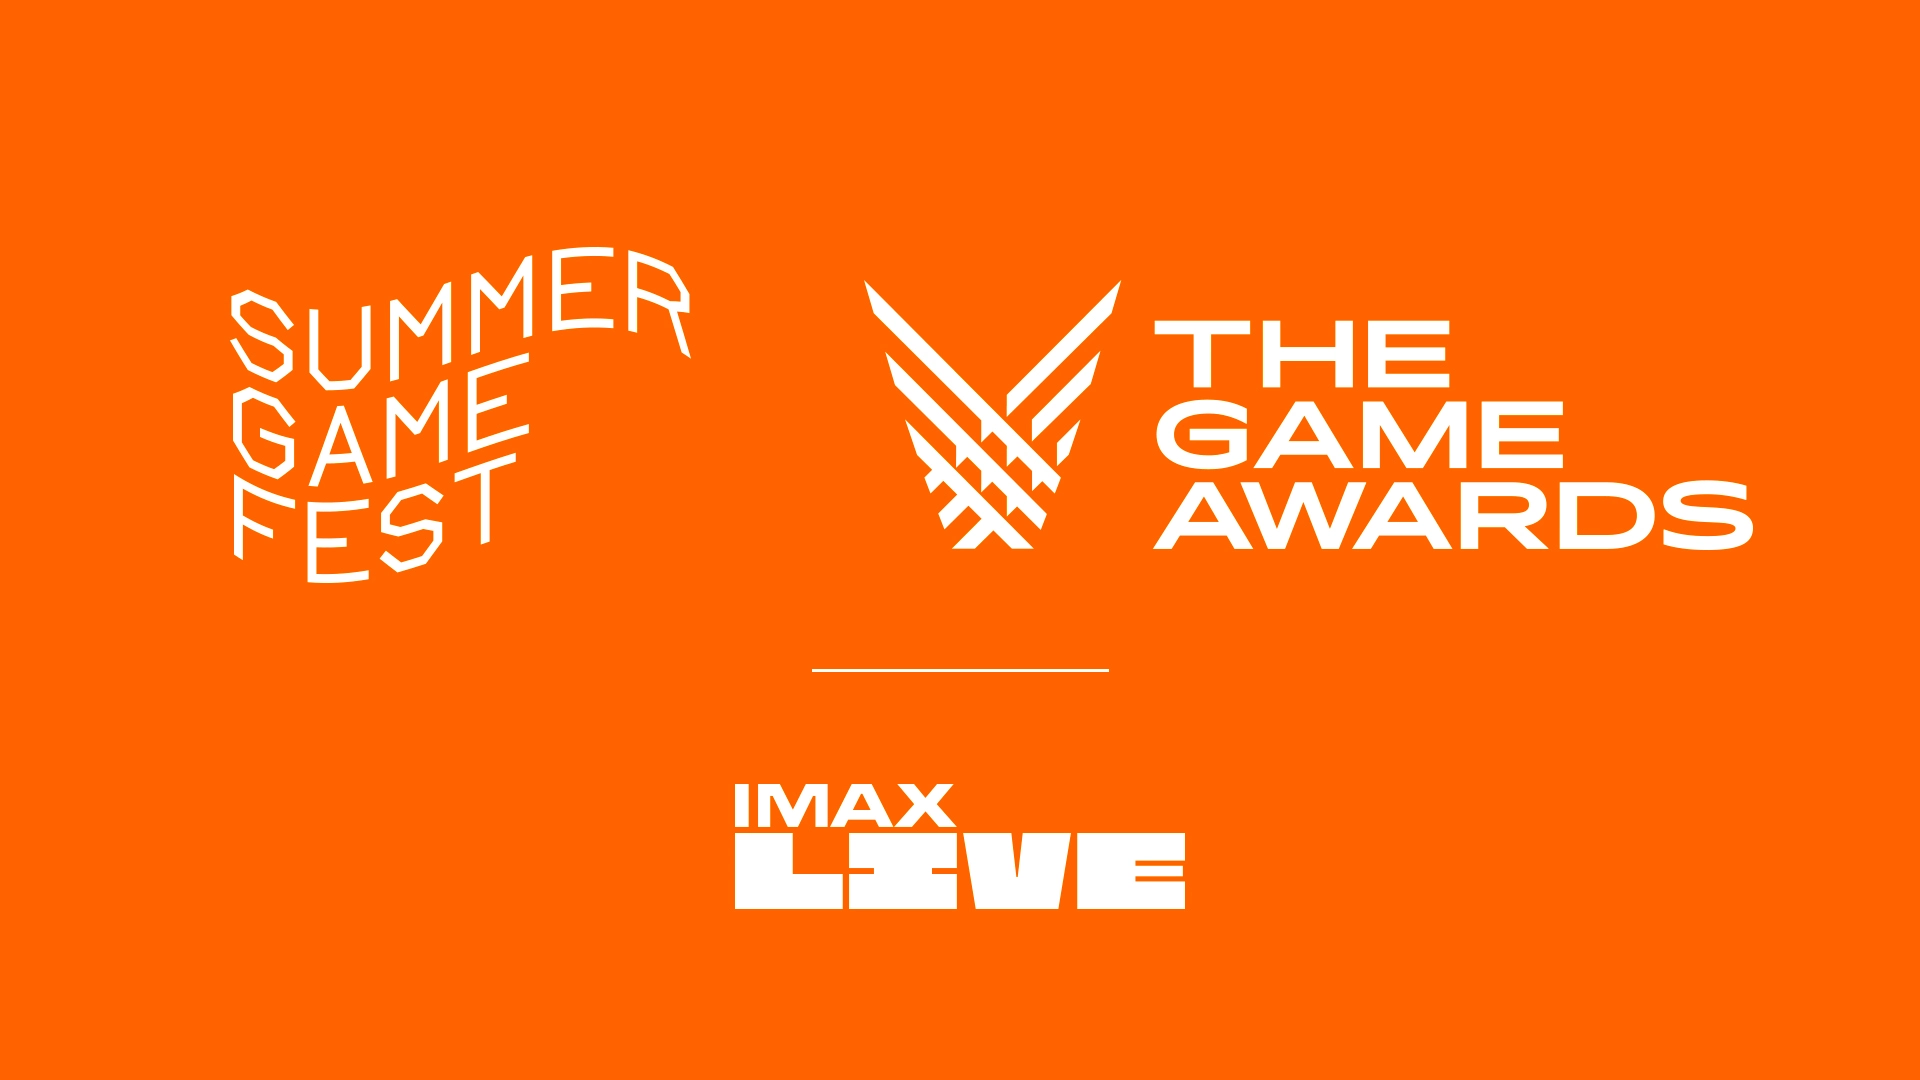 Summer Game Fest IMAX LIVE News Indie Game Fans